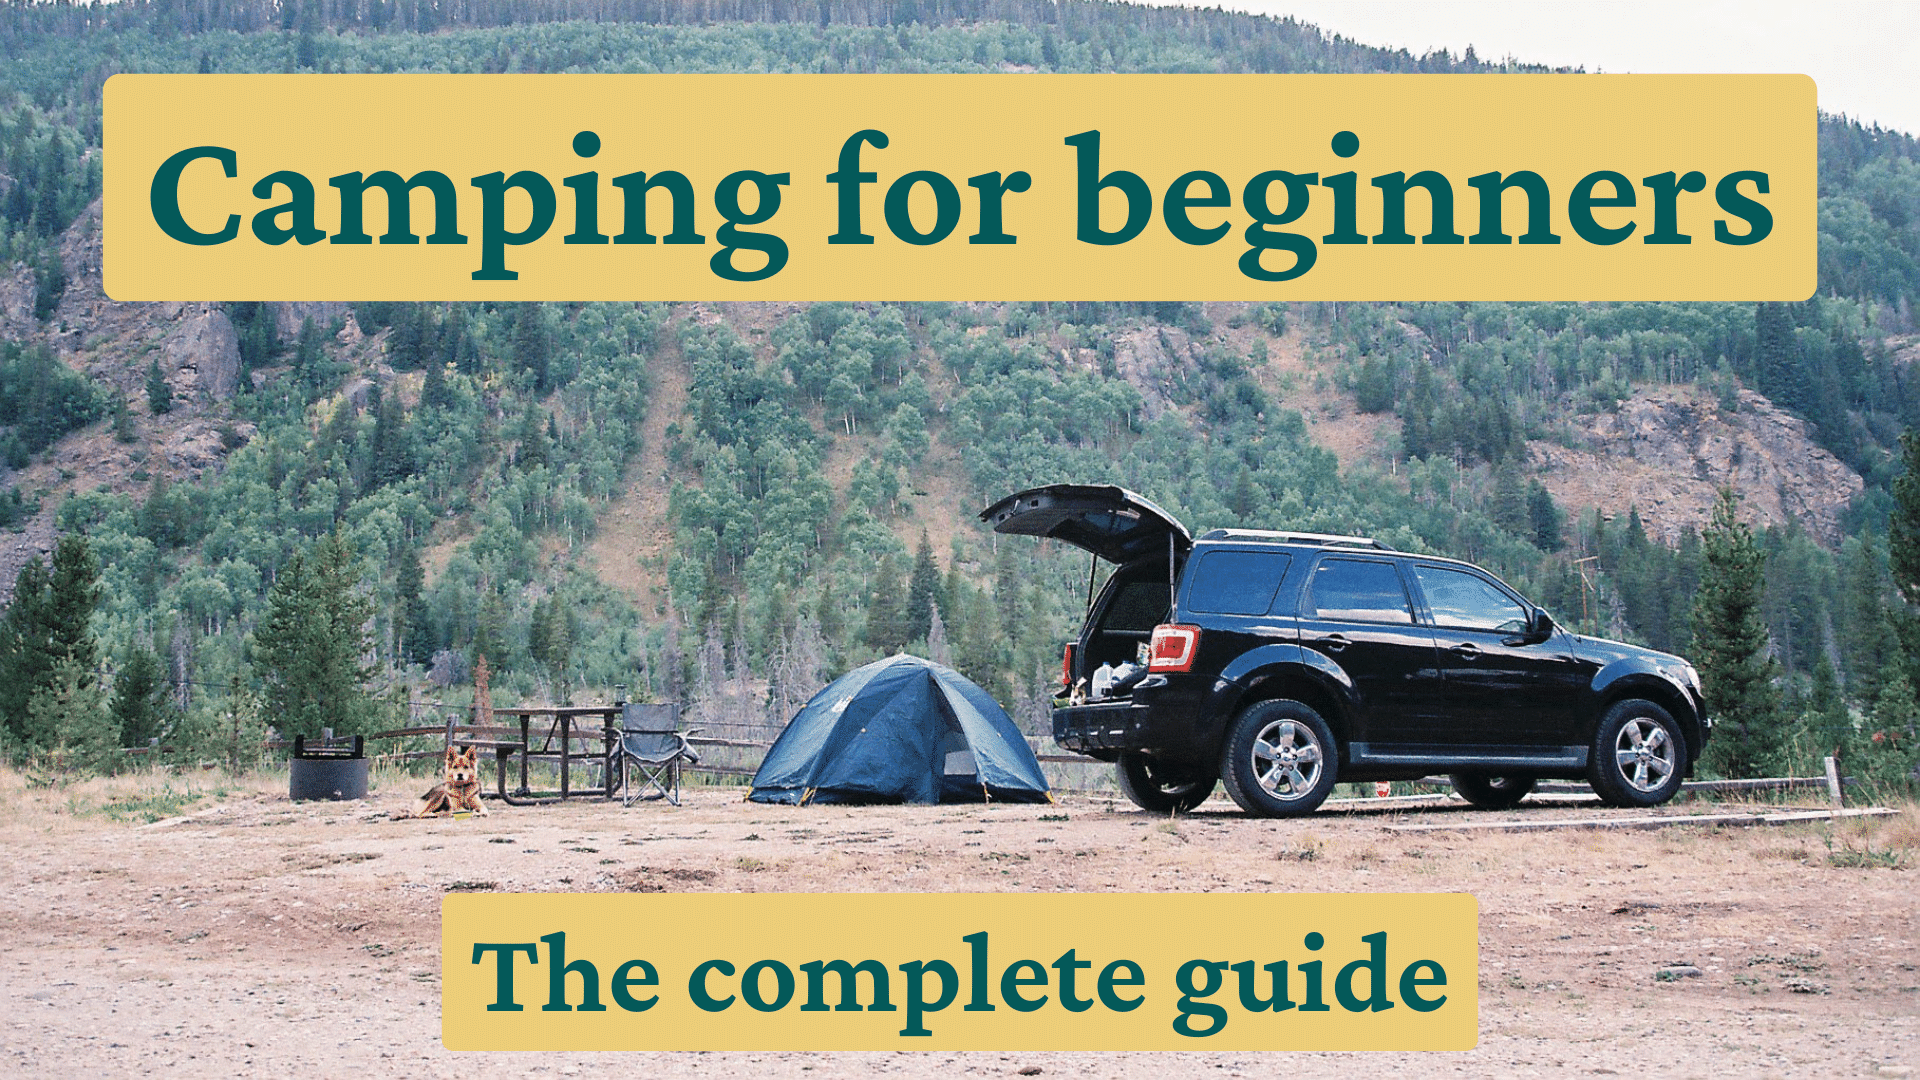 The complete guide to camping for beginners